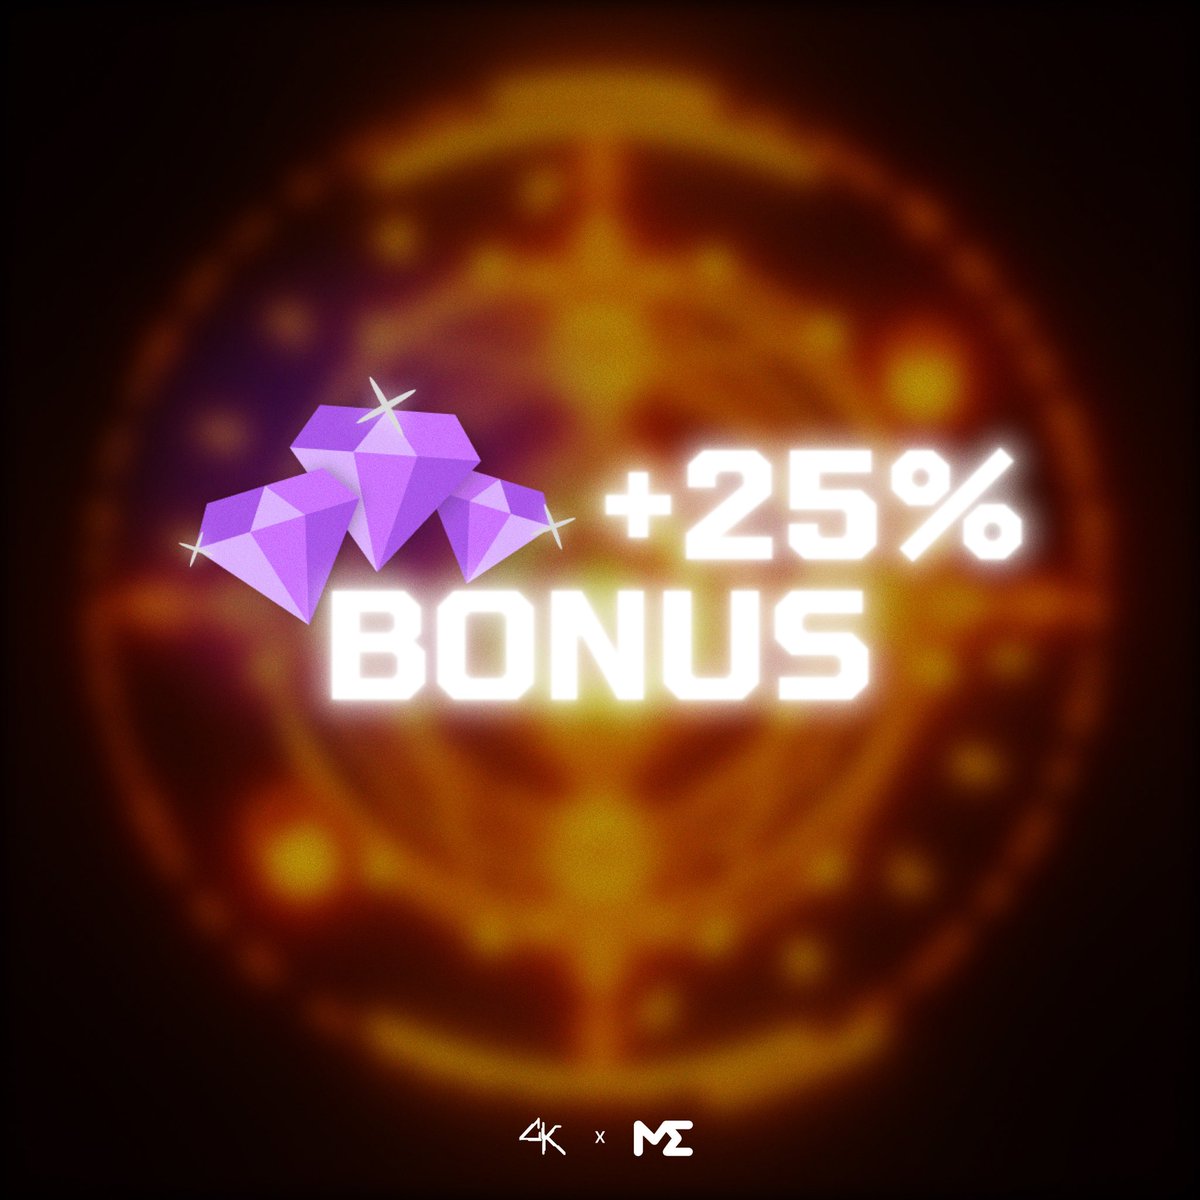 Prometheans ⚡ @MagicEden You will now collect a 25% bonus on all Diamond quests when buying or listing Prometheans on Magic Eden!